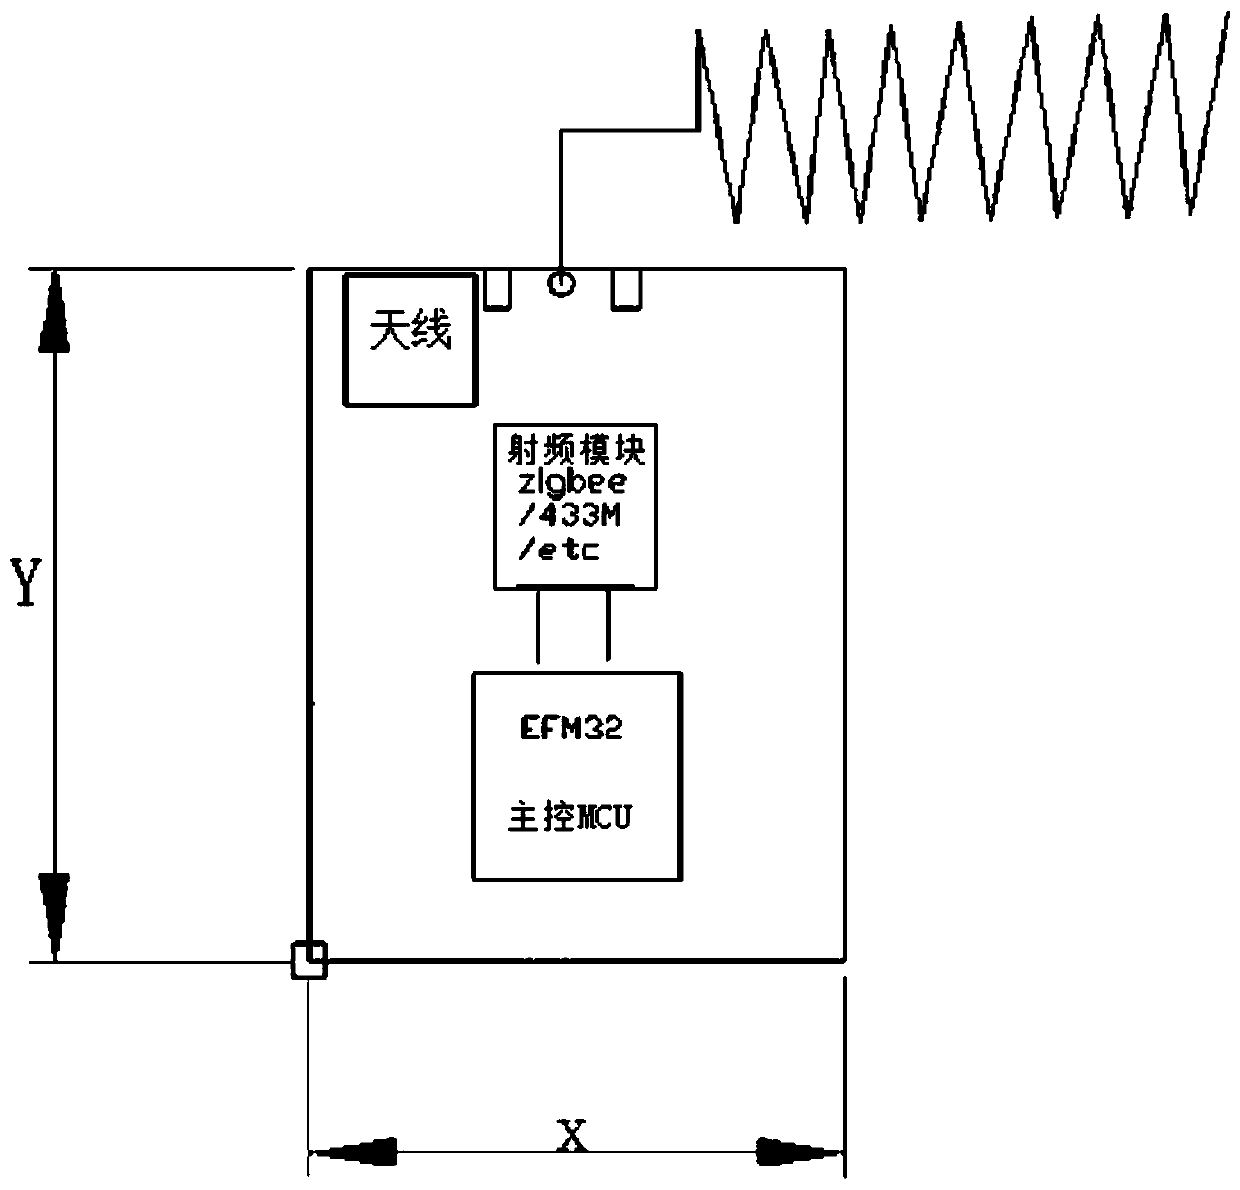 System for seamlessly switching various wireless transmission modes